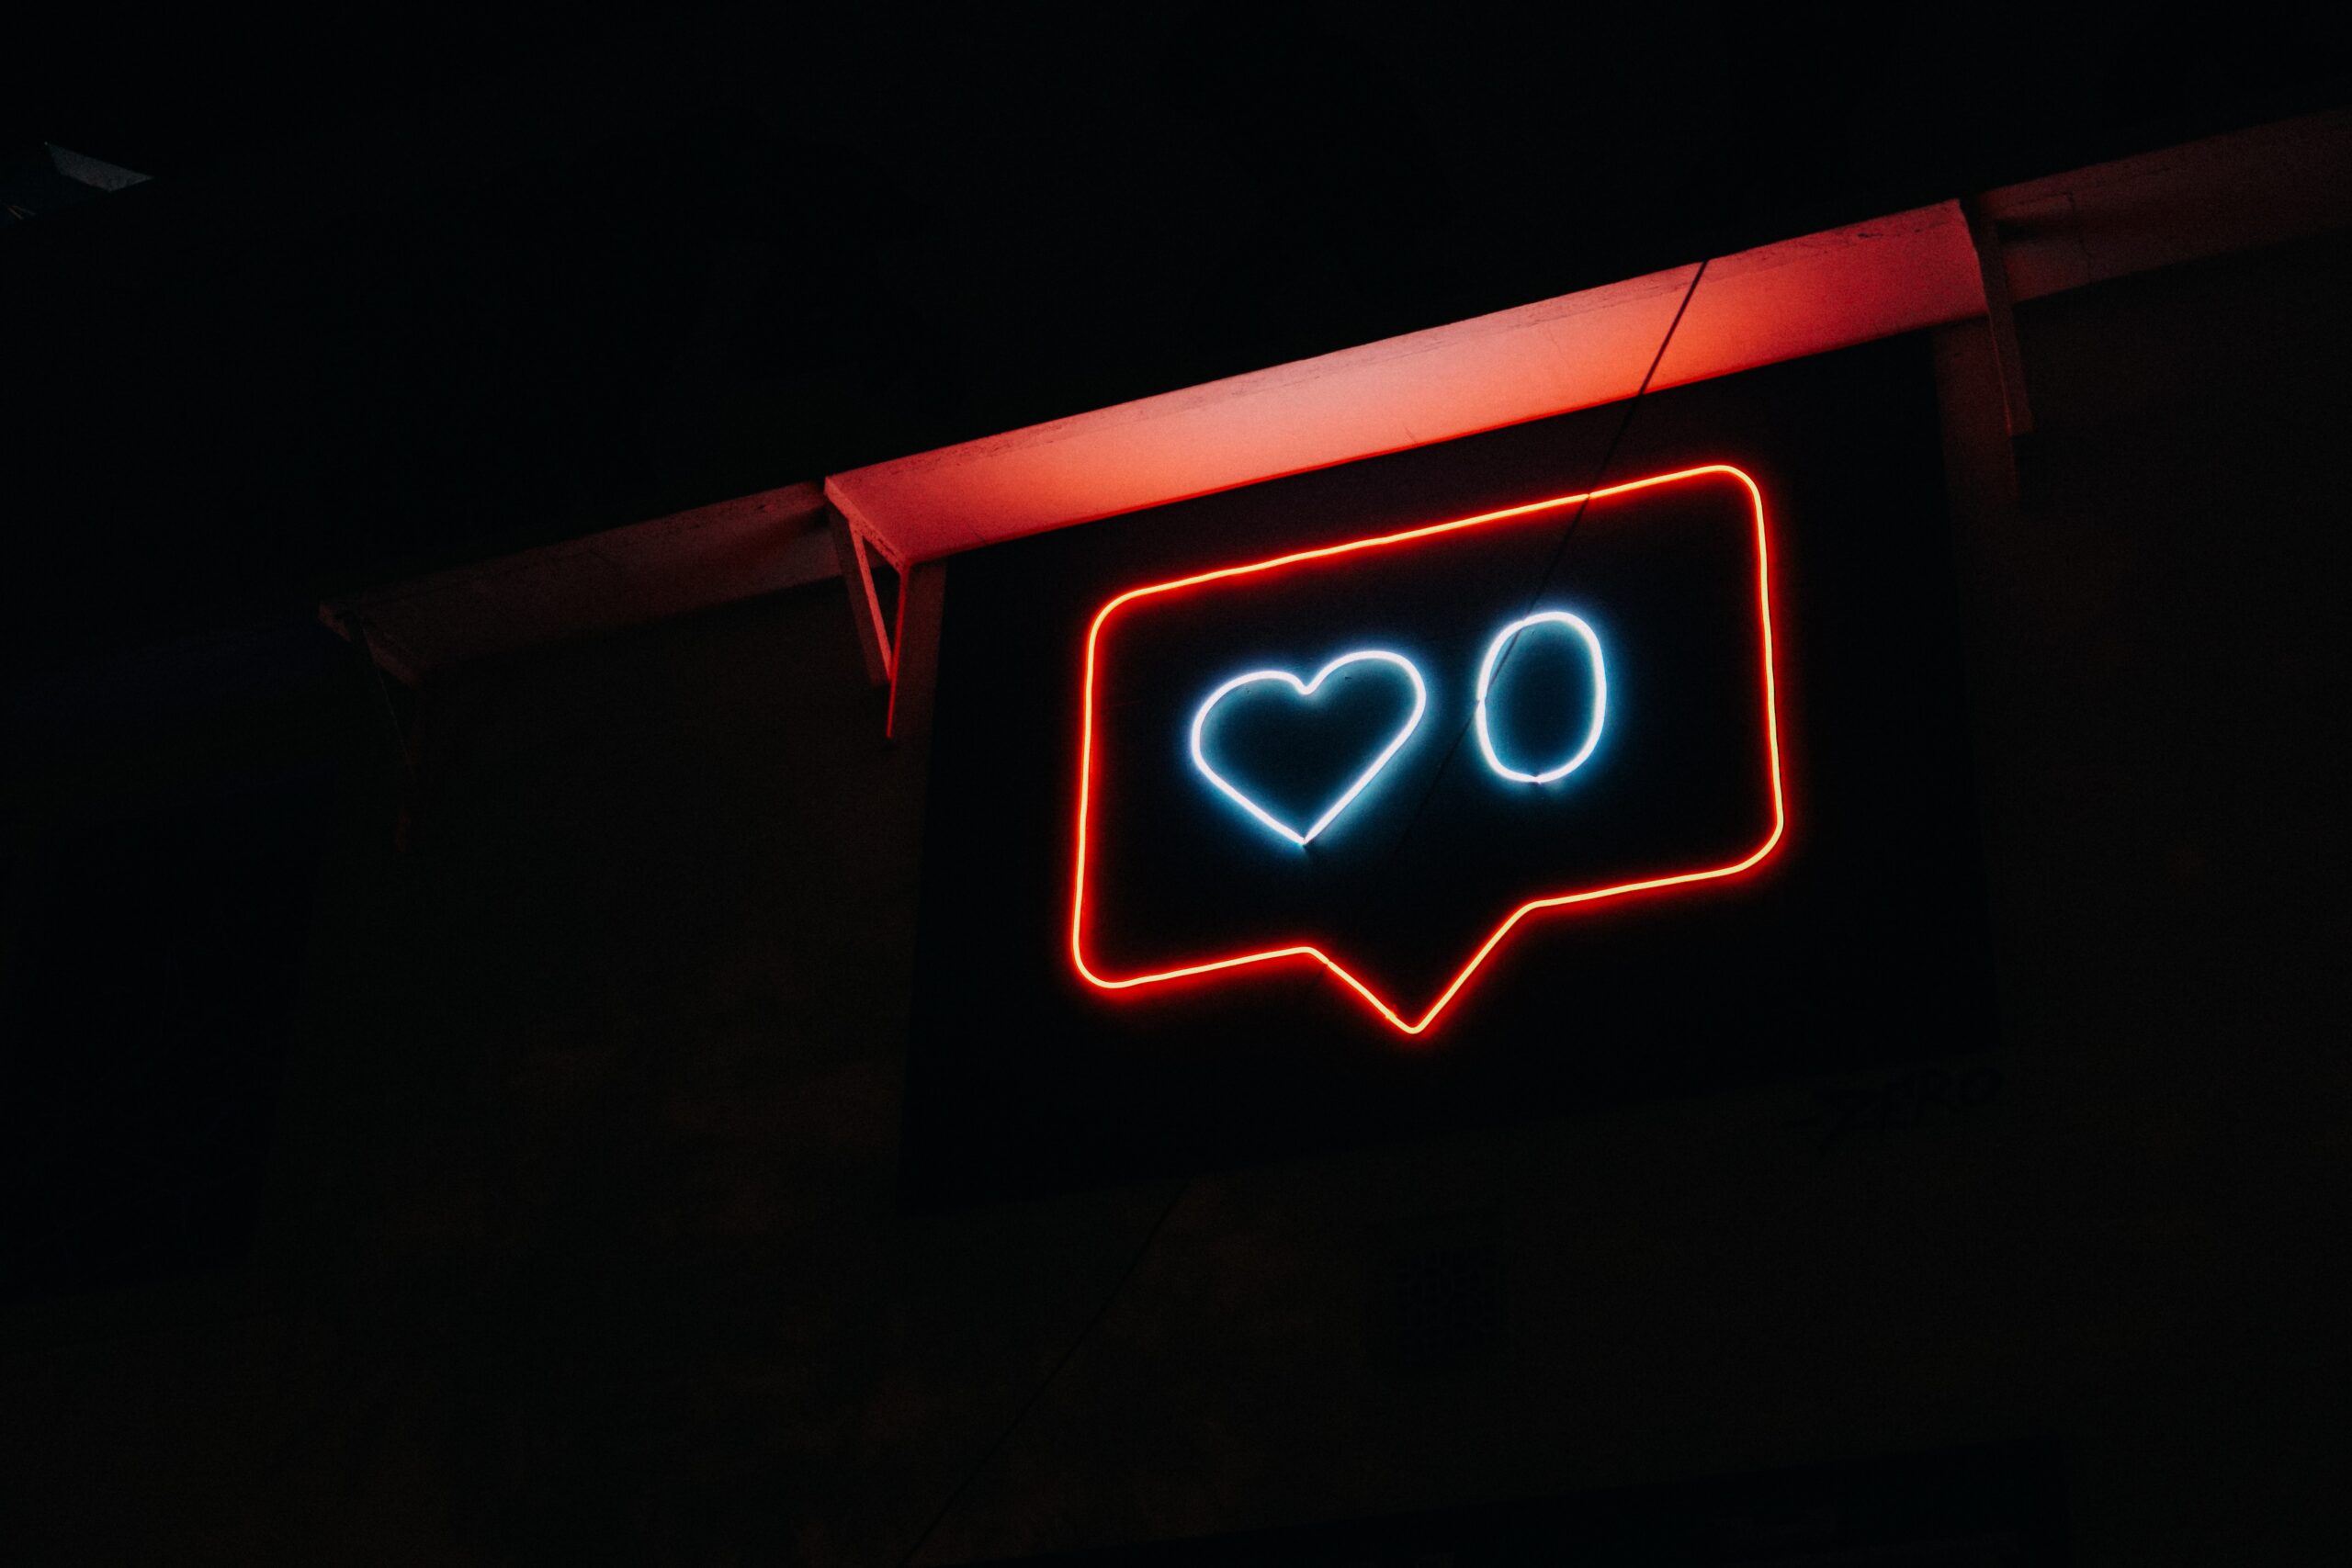 Red neon sign on in the shape of a speech bubble on a black background. A white heart next to a white zero is inside the speech bubble. The red overhang of a roof is over the speech bubble.